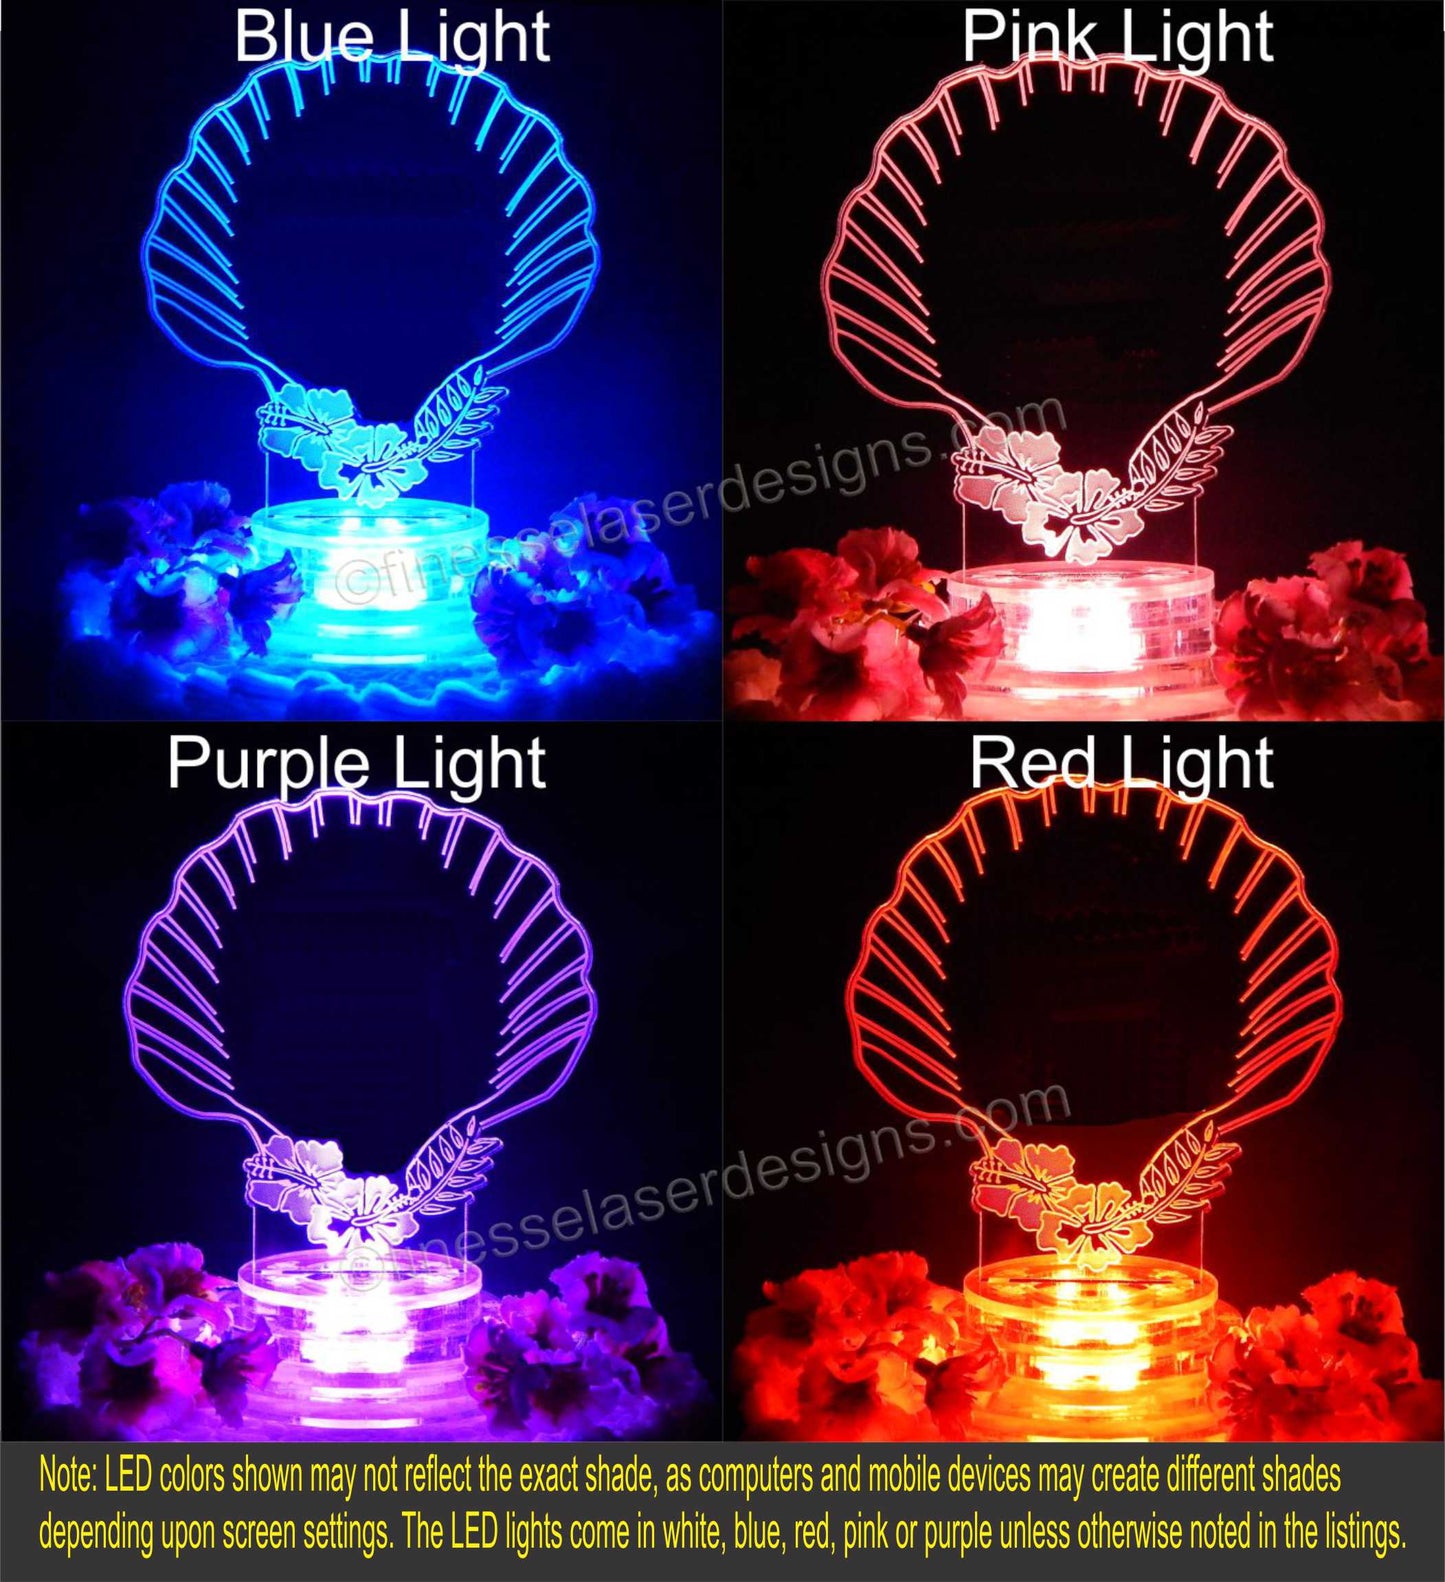 Acrylic seashell shaped cake topper shown in multiple views with colored lights, shown in blue, pink, purple and red lights